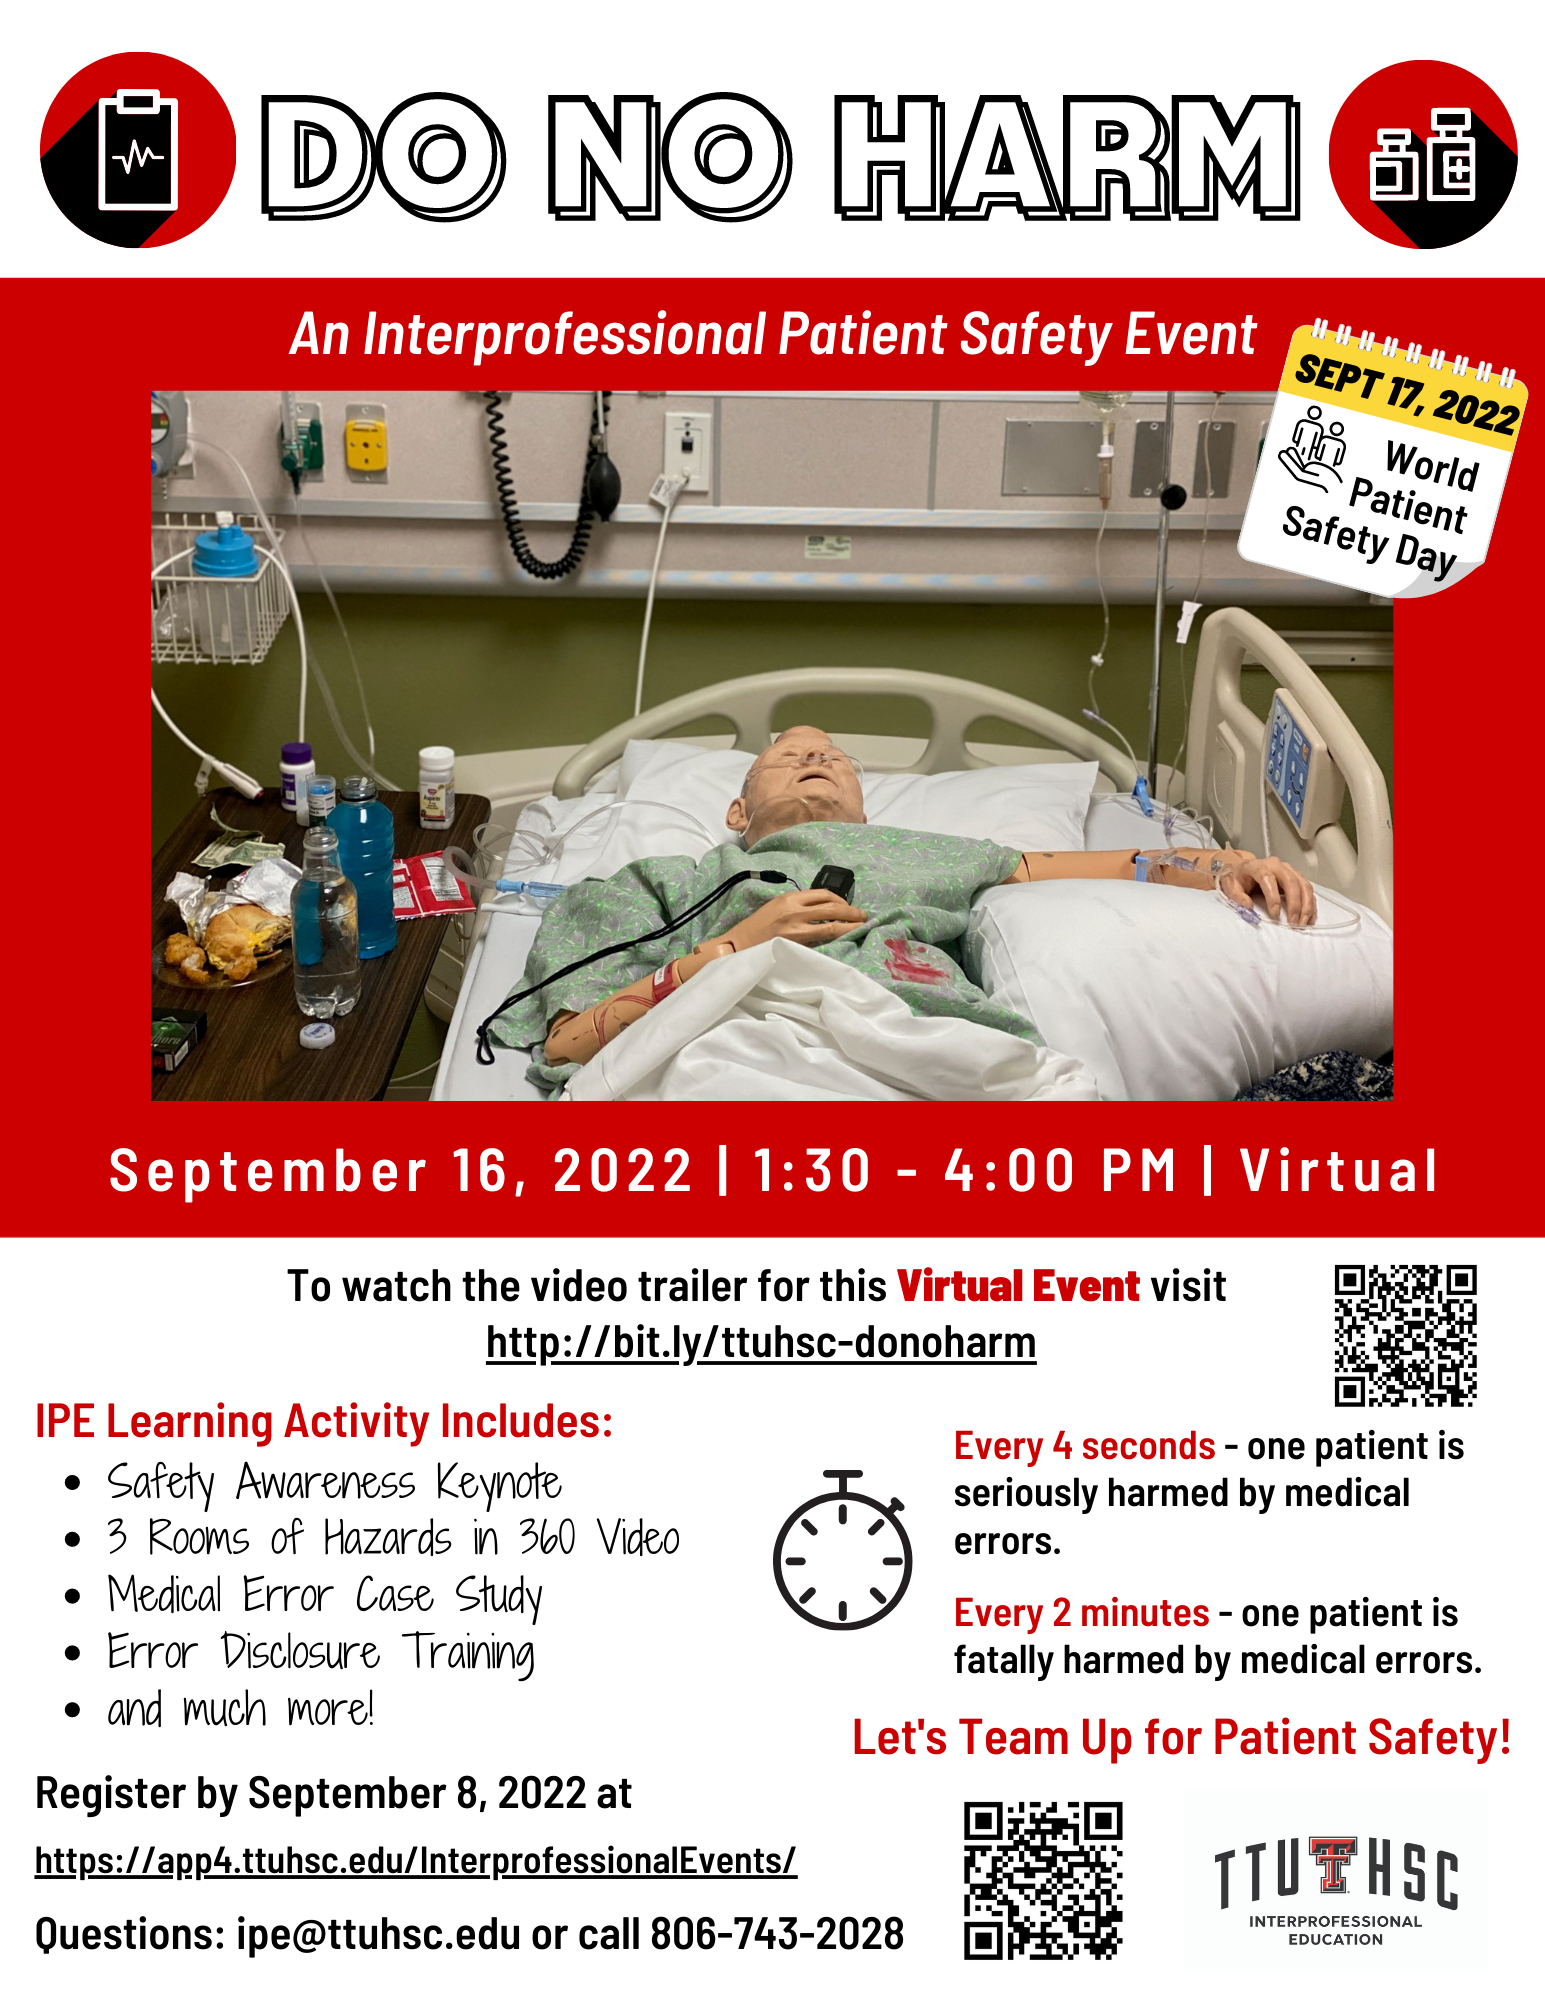 Do No Harm: An Interprofessional Patient Safety Event